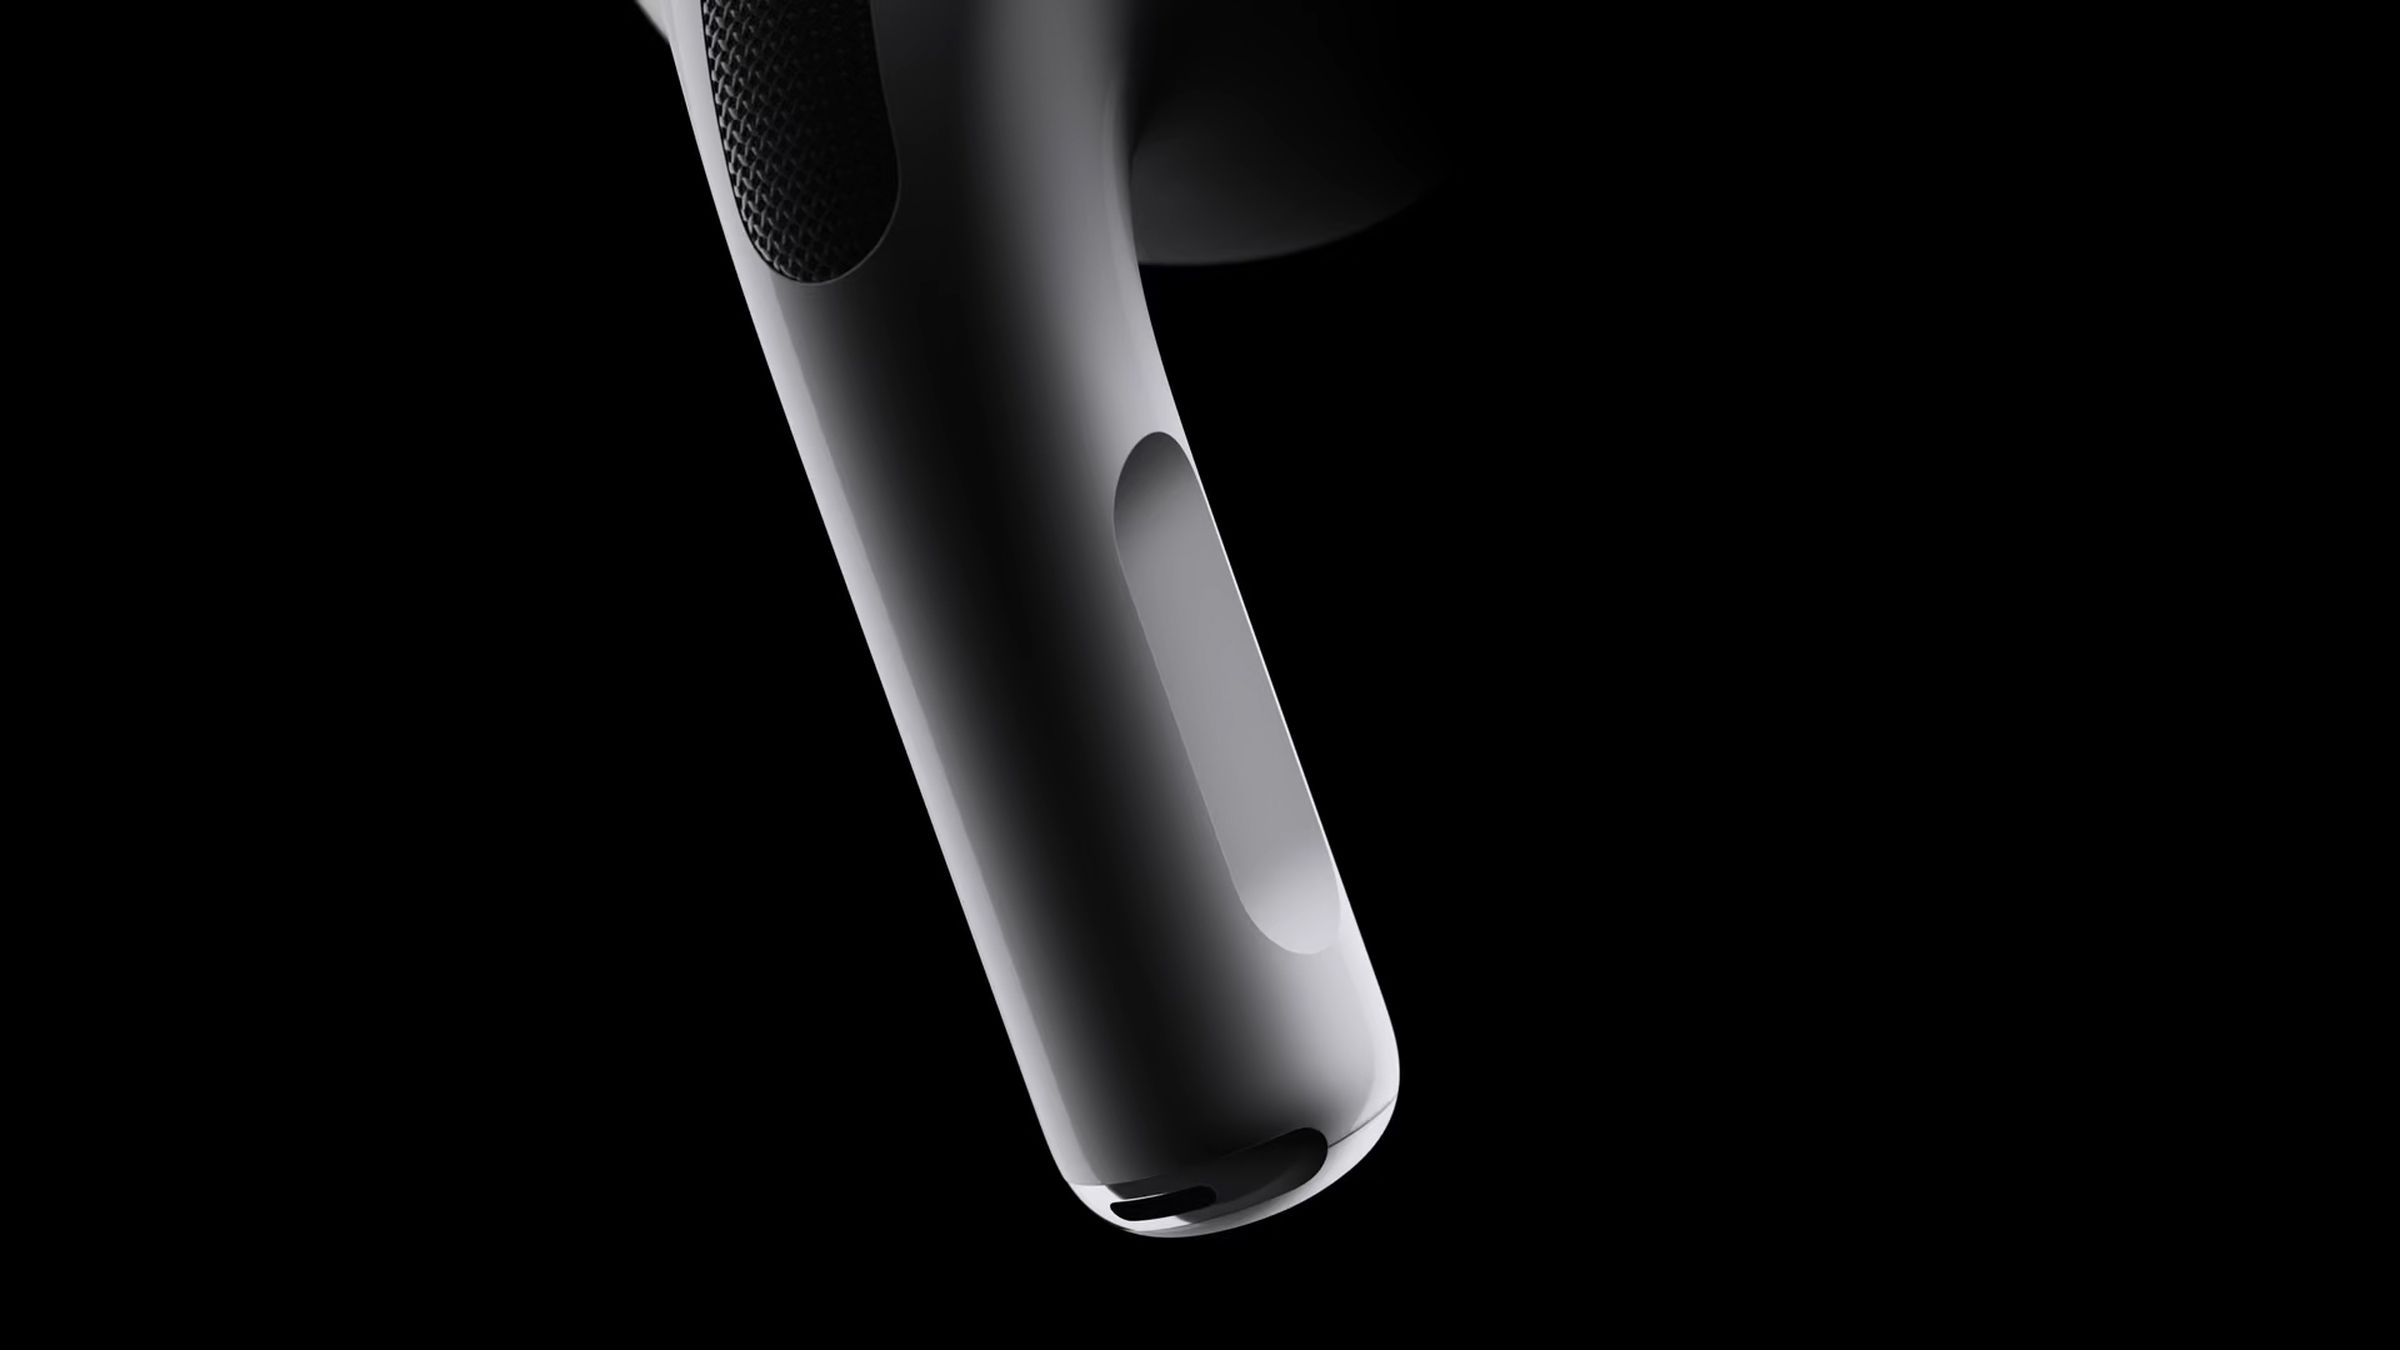 With the second-gen AirPods Pro, you merely need to swipe up or down on the stem to adjust the volume.